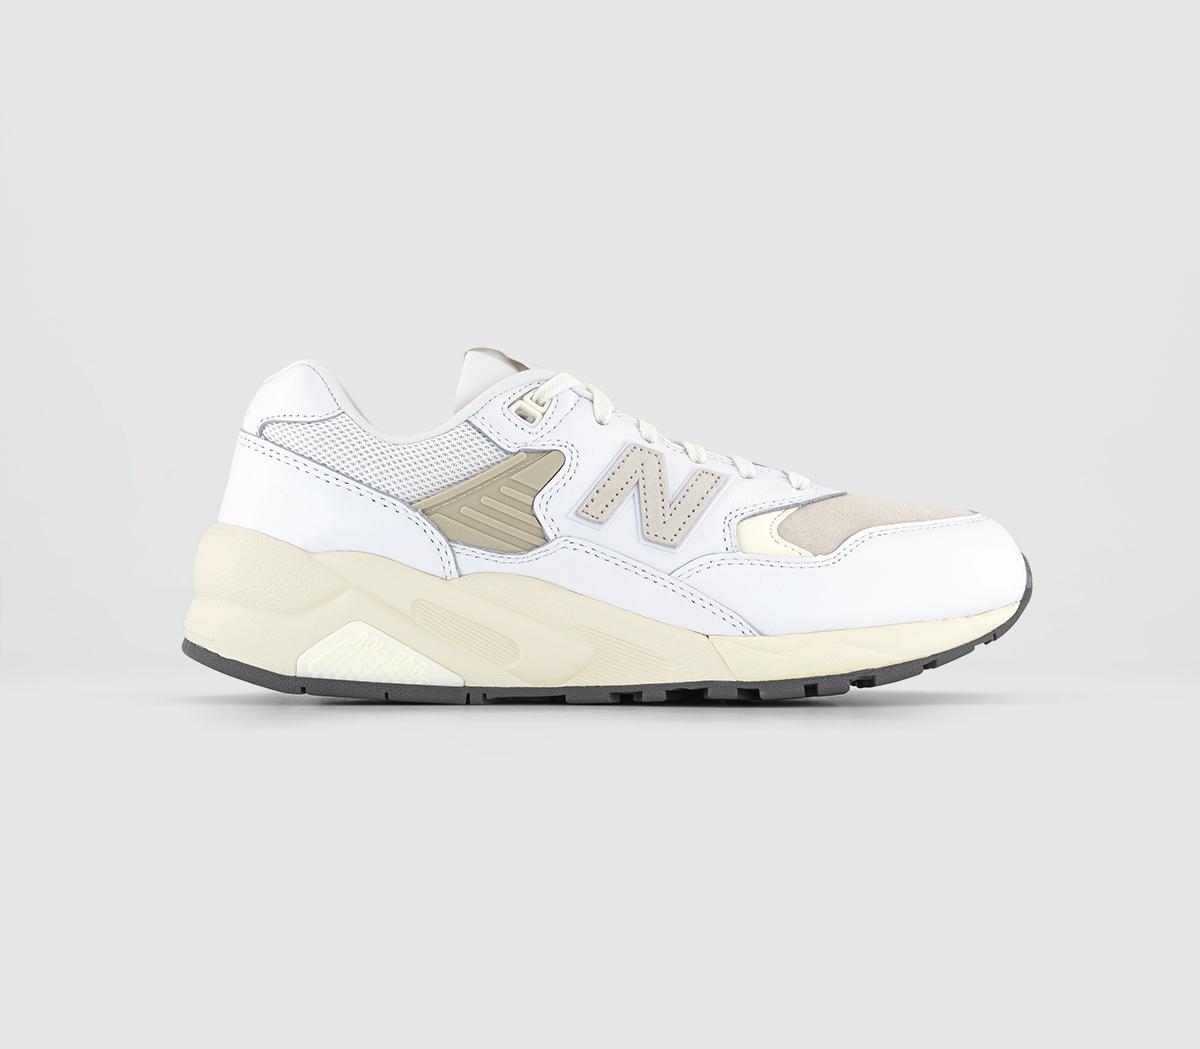 New Balance MT580 Trainers White Off White - Men's Trainers